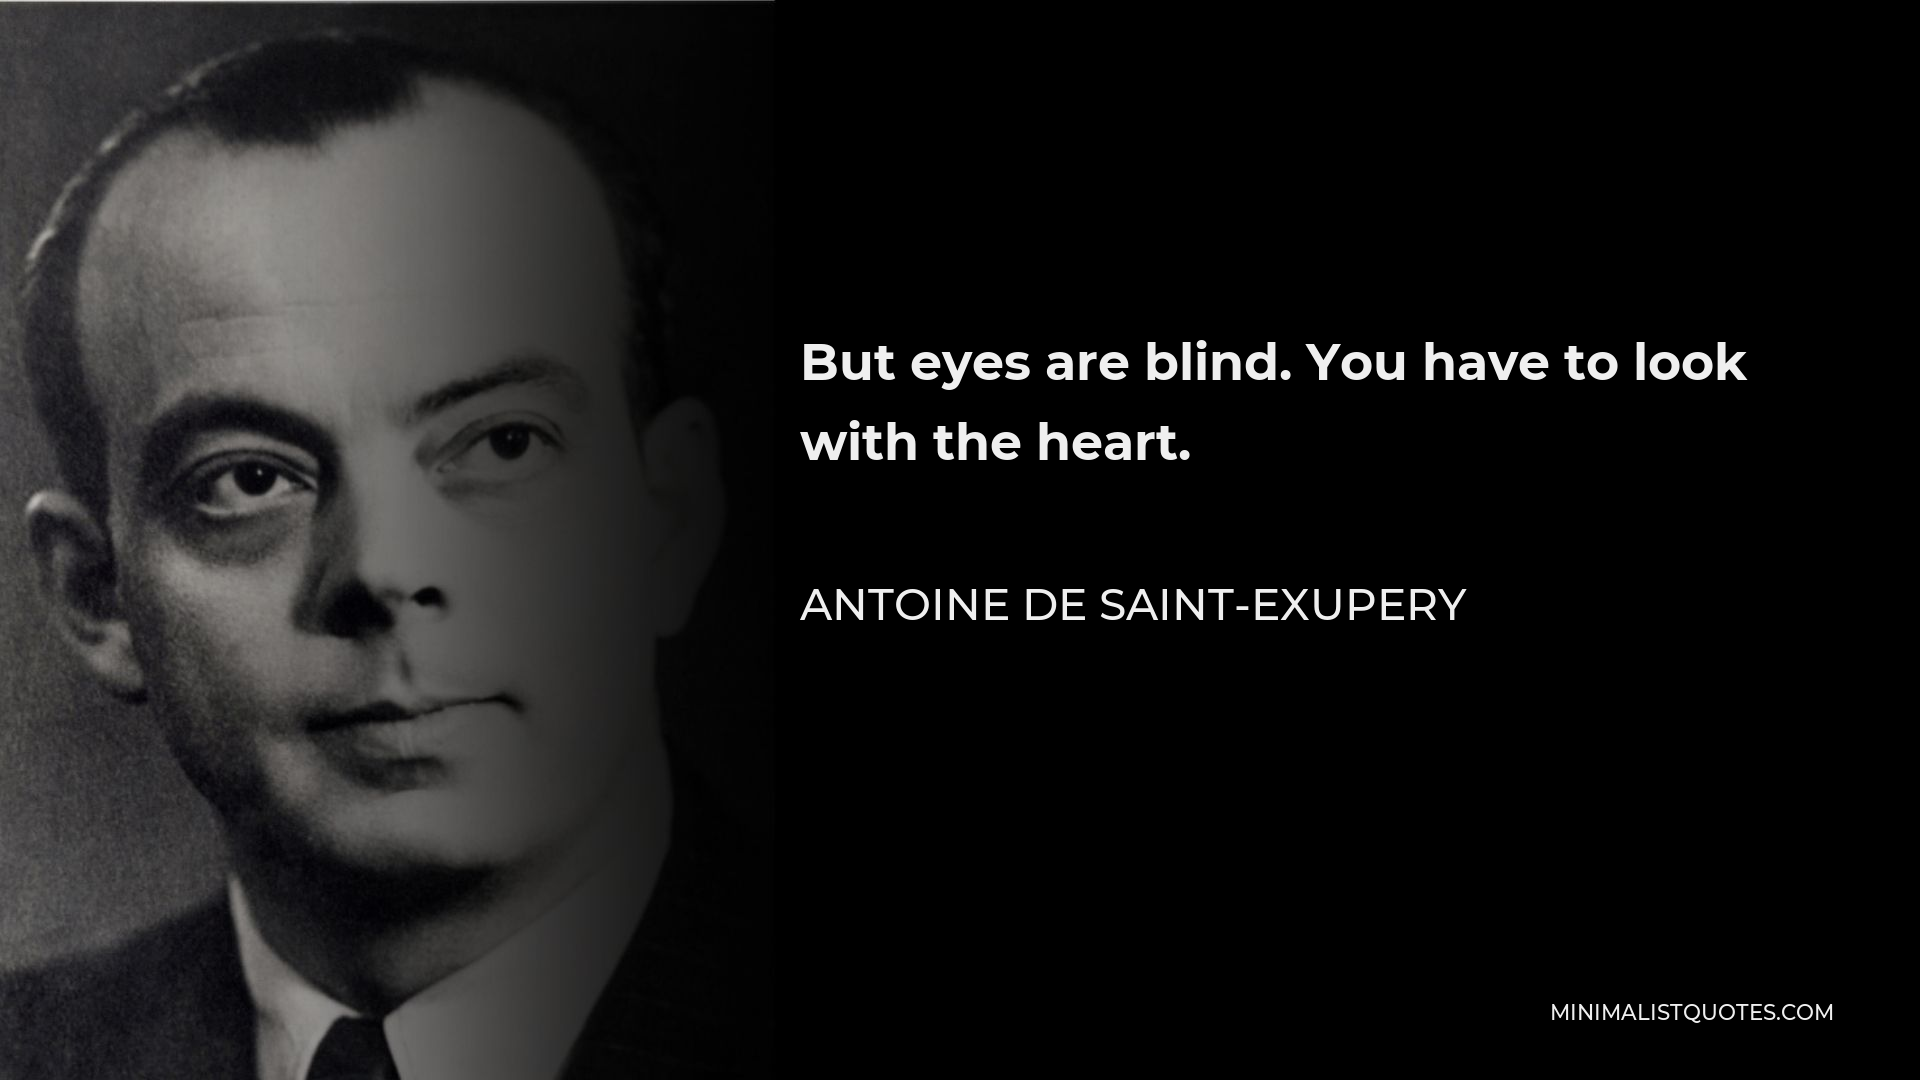 Antoine de Saint-Exupery Quote - But eyes are blind. You have to look with the heart.